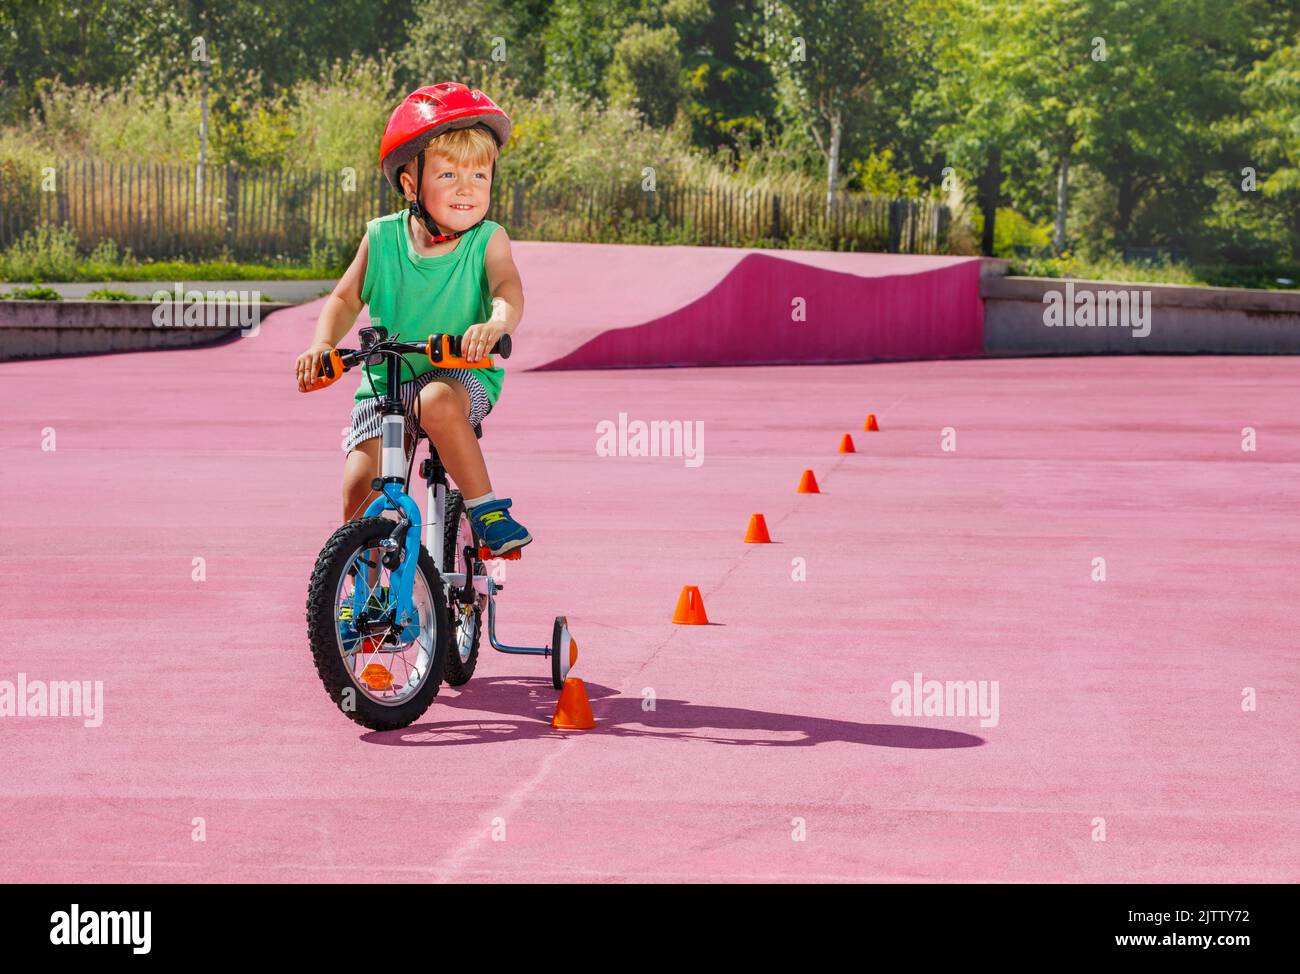 Boy ride small bicycle with learning wheels around orange cones Stock Photo